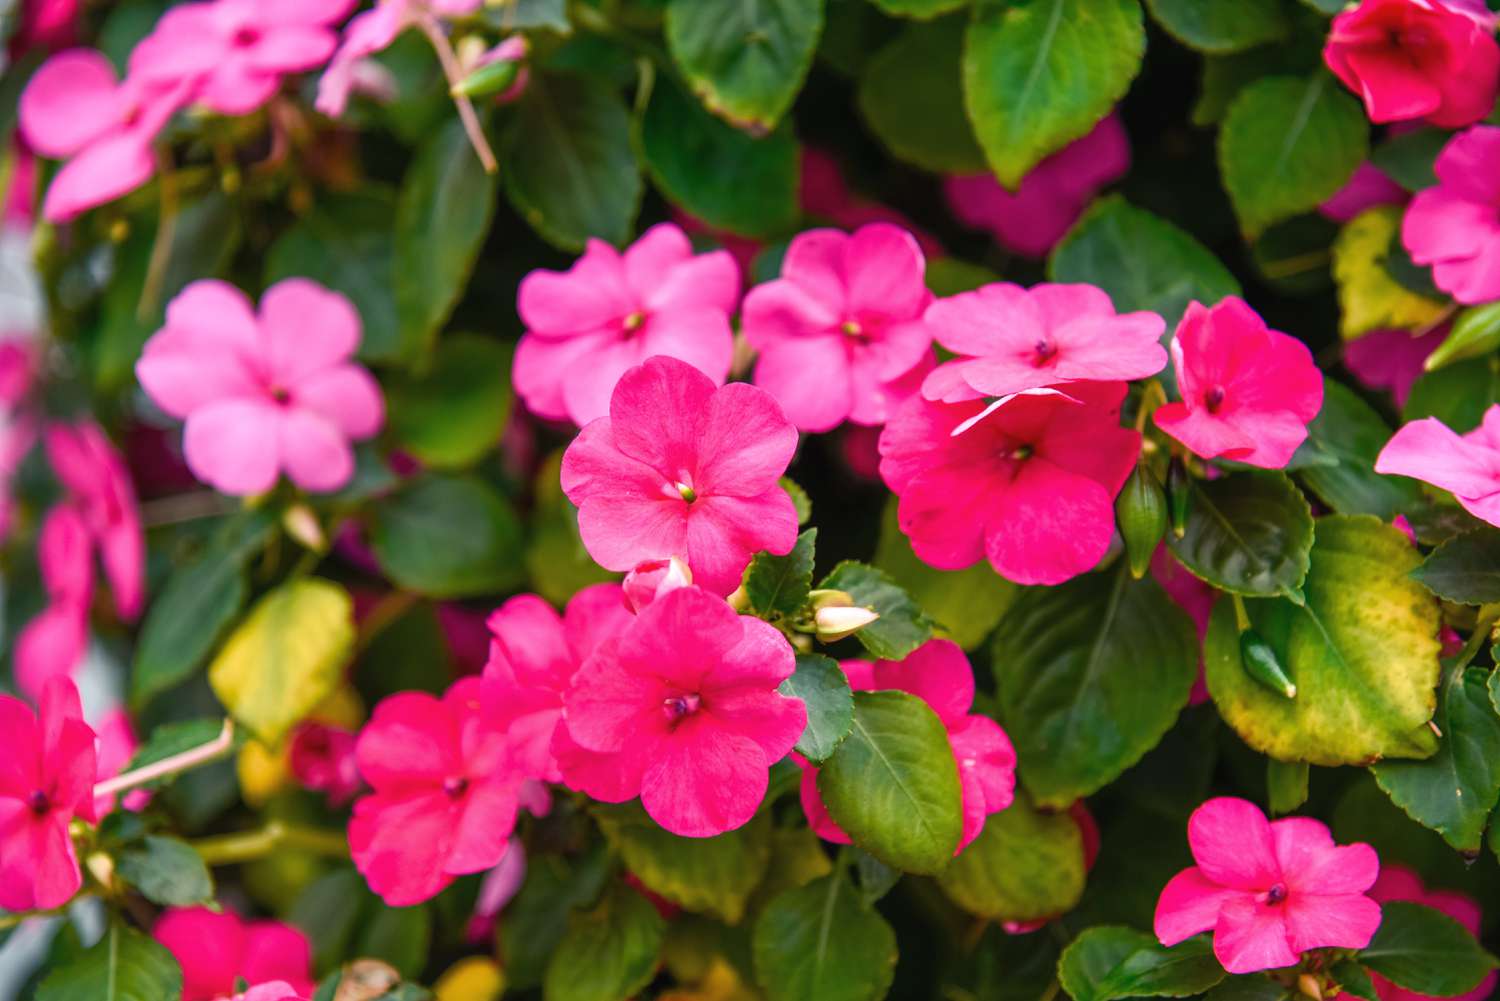 Impatiens flowers with pink blooms clustered in shade garden